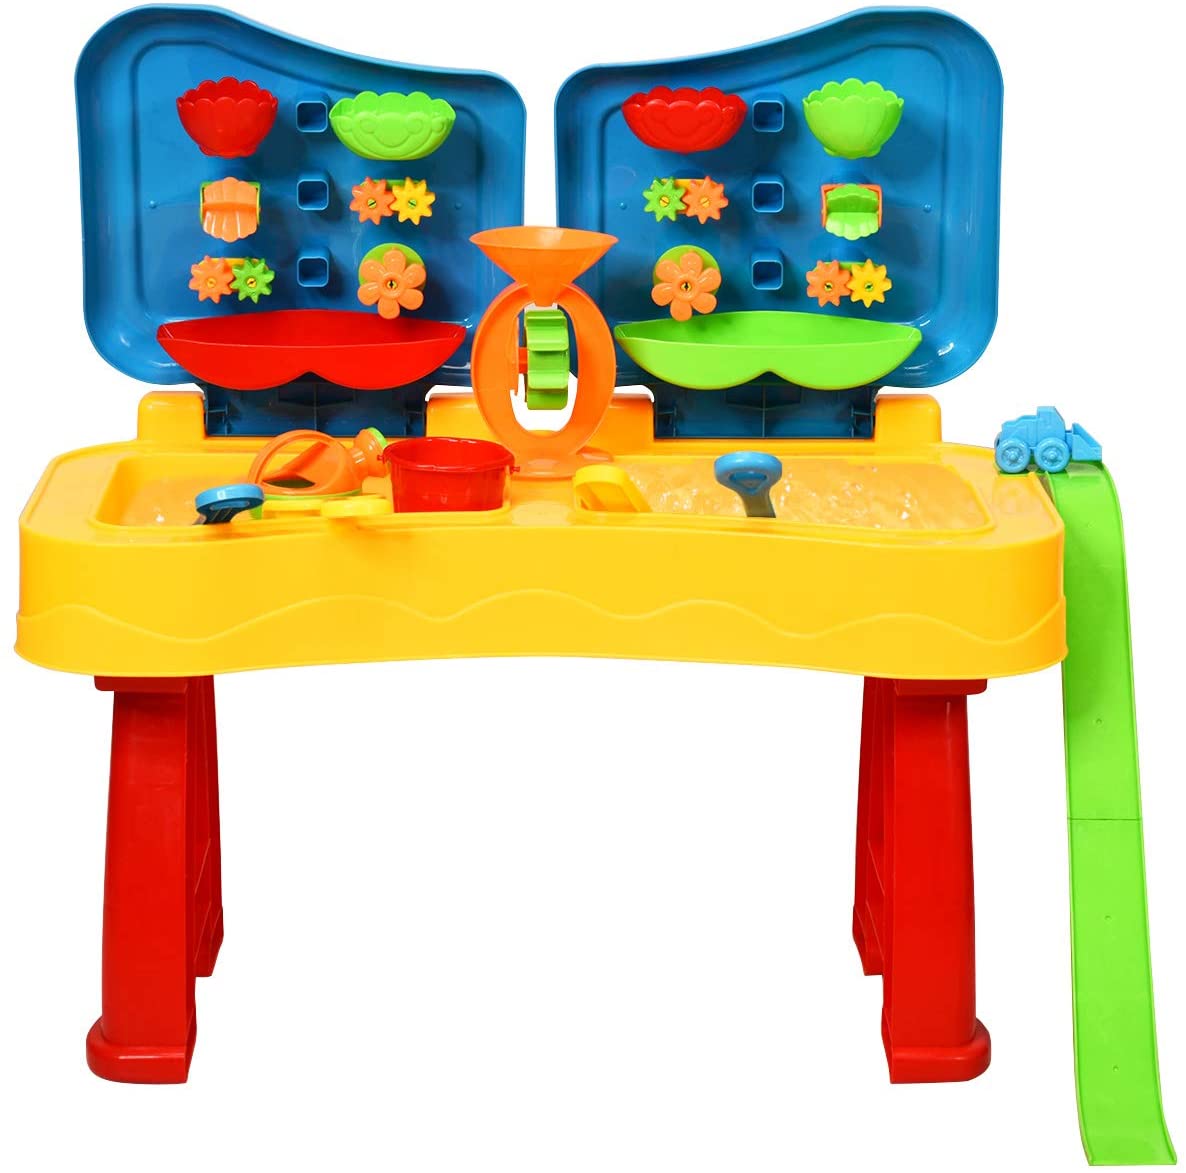 Costway 2-In-1 Sand And Water Play Table, Sand Pit Table For Kids, Kids Pla